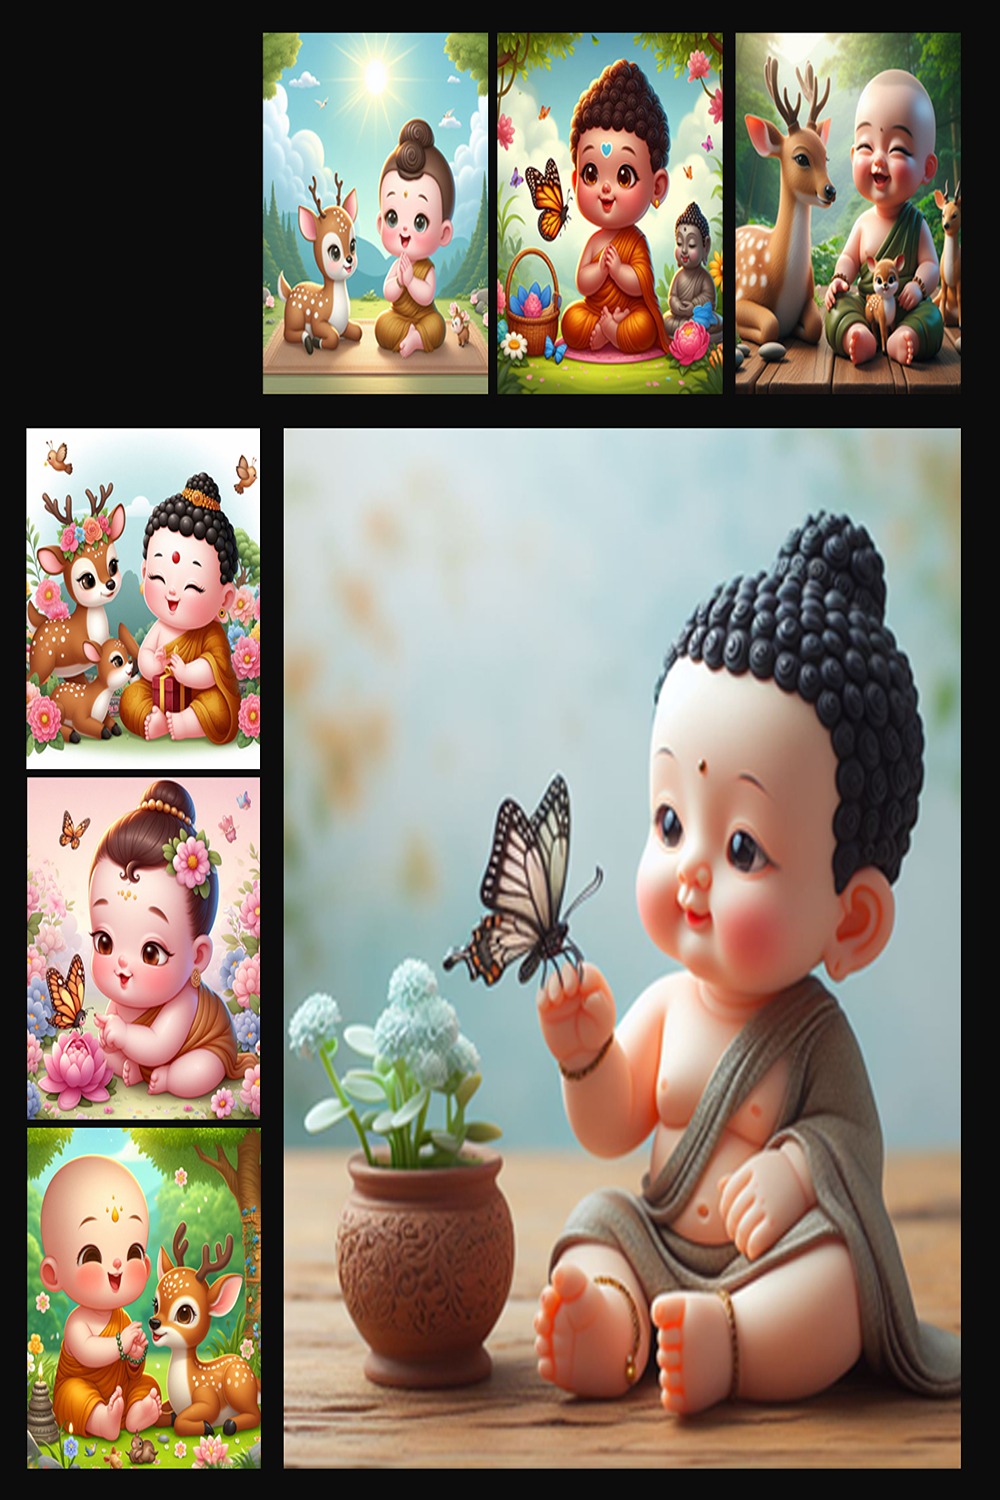 Cute Buddha Baby images pinterest preview image.